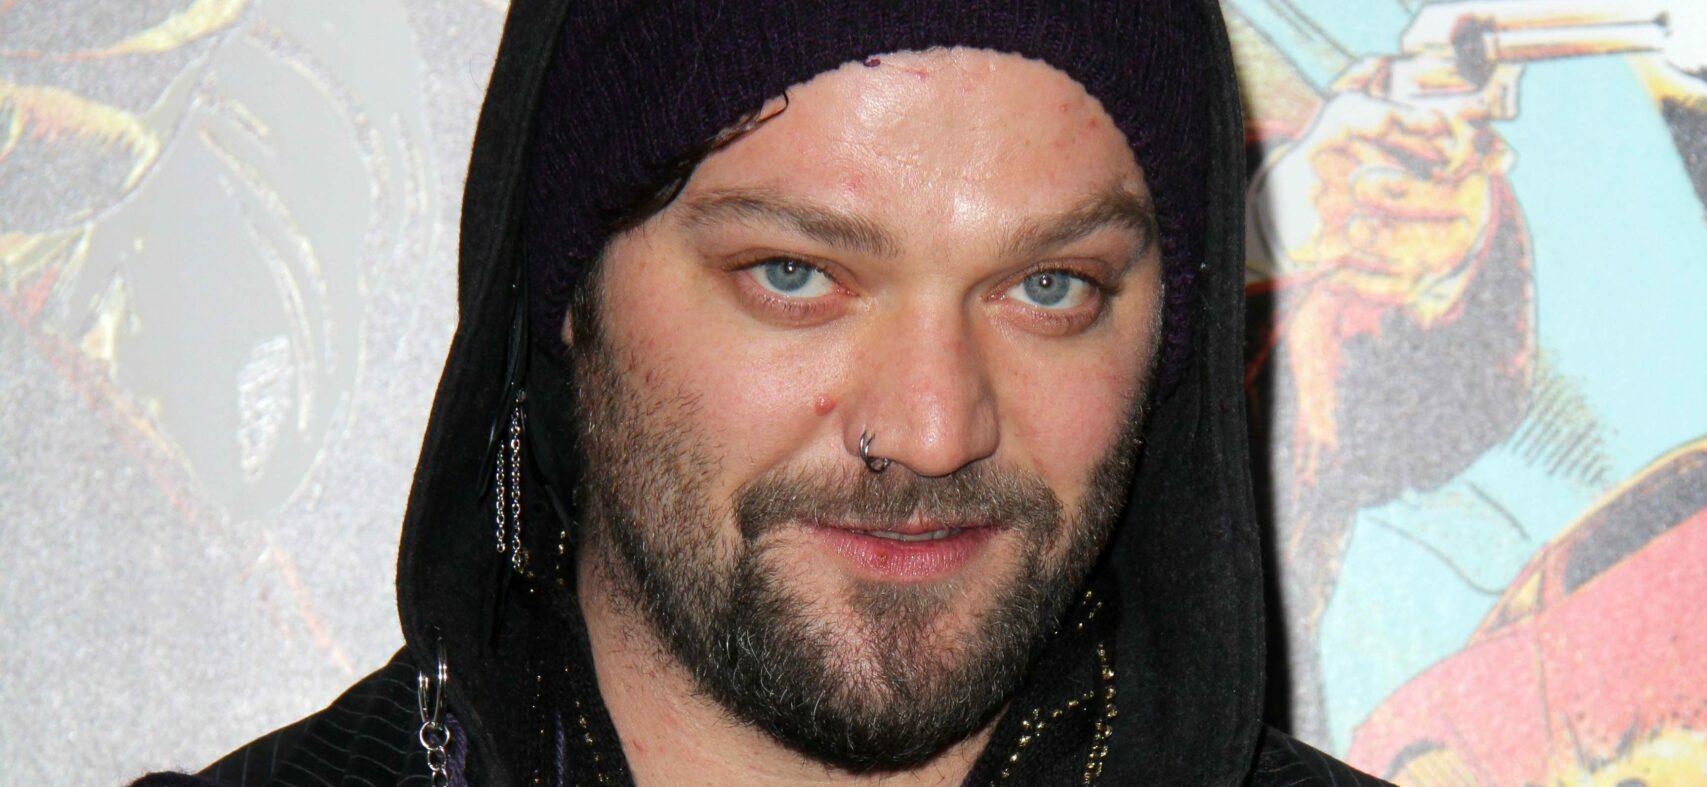 Bam Margera Got A Britney Spears-Inspired Tattoo With A Twist On Her ‘Oops’ Lyric